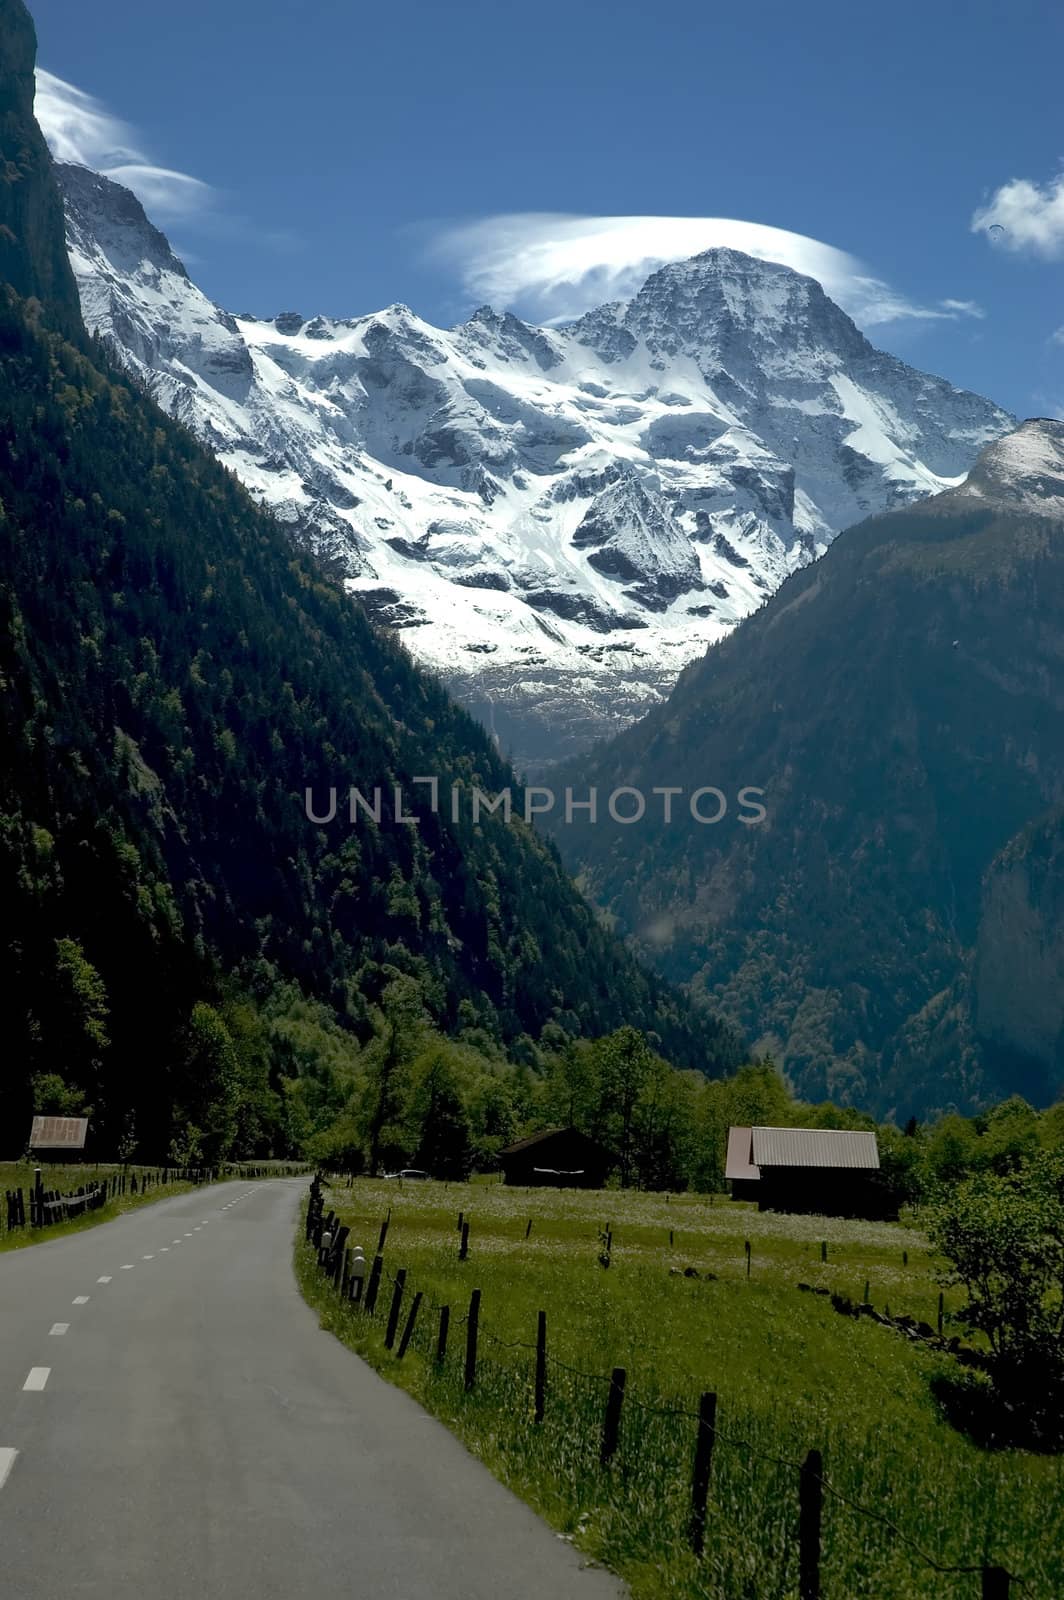 Swiss Alps and the road by eugenef